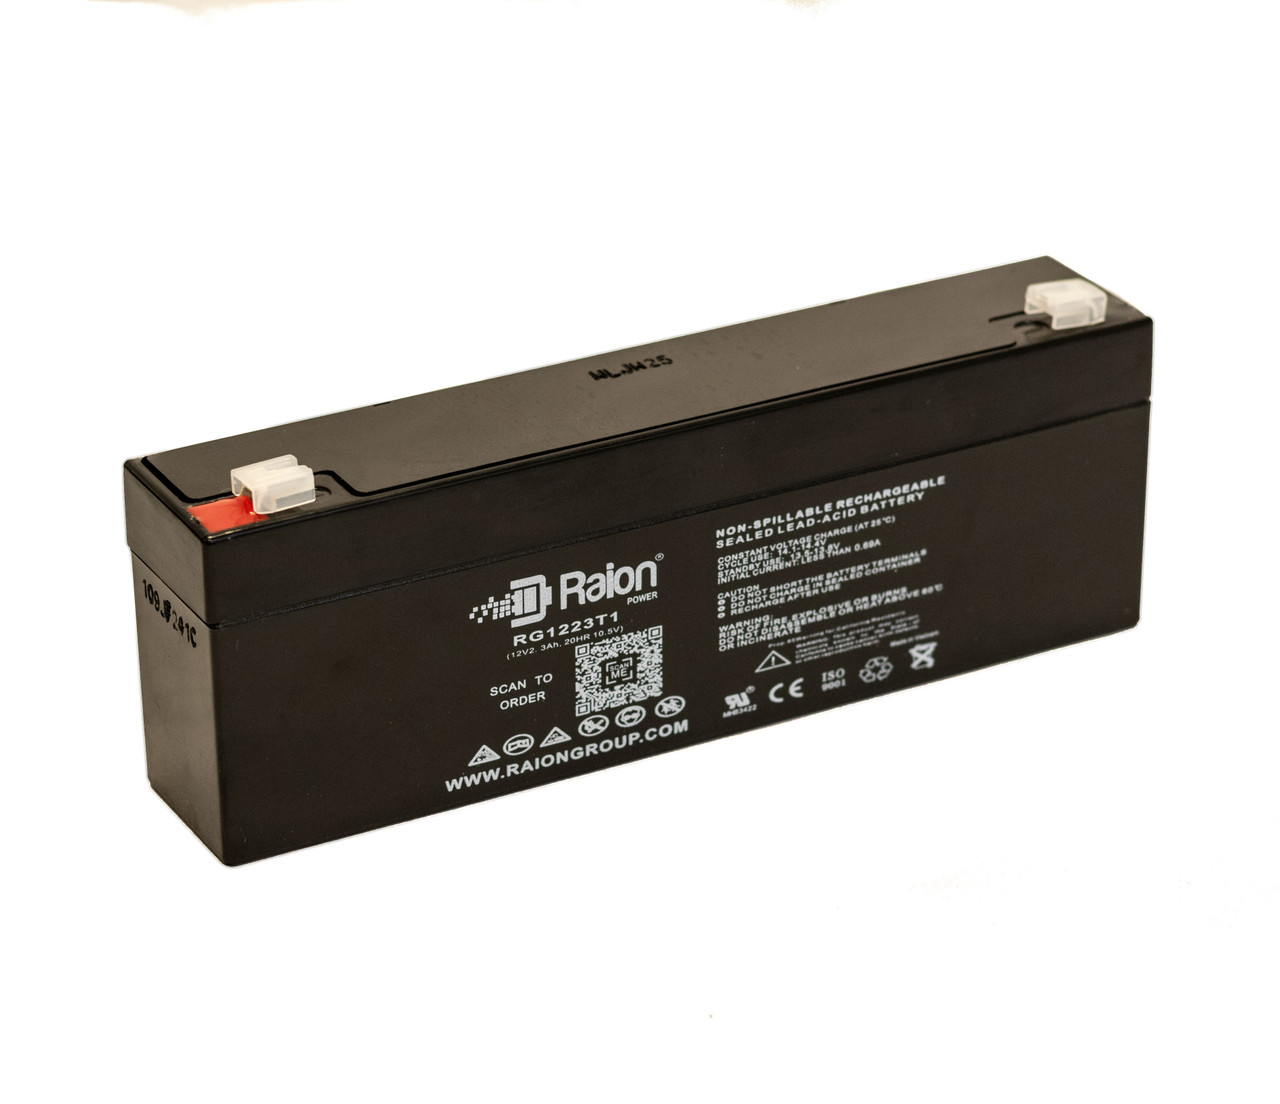 Raion Power RG1223T1 Replacement Battery for Oracle HD1223